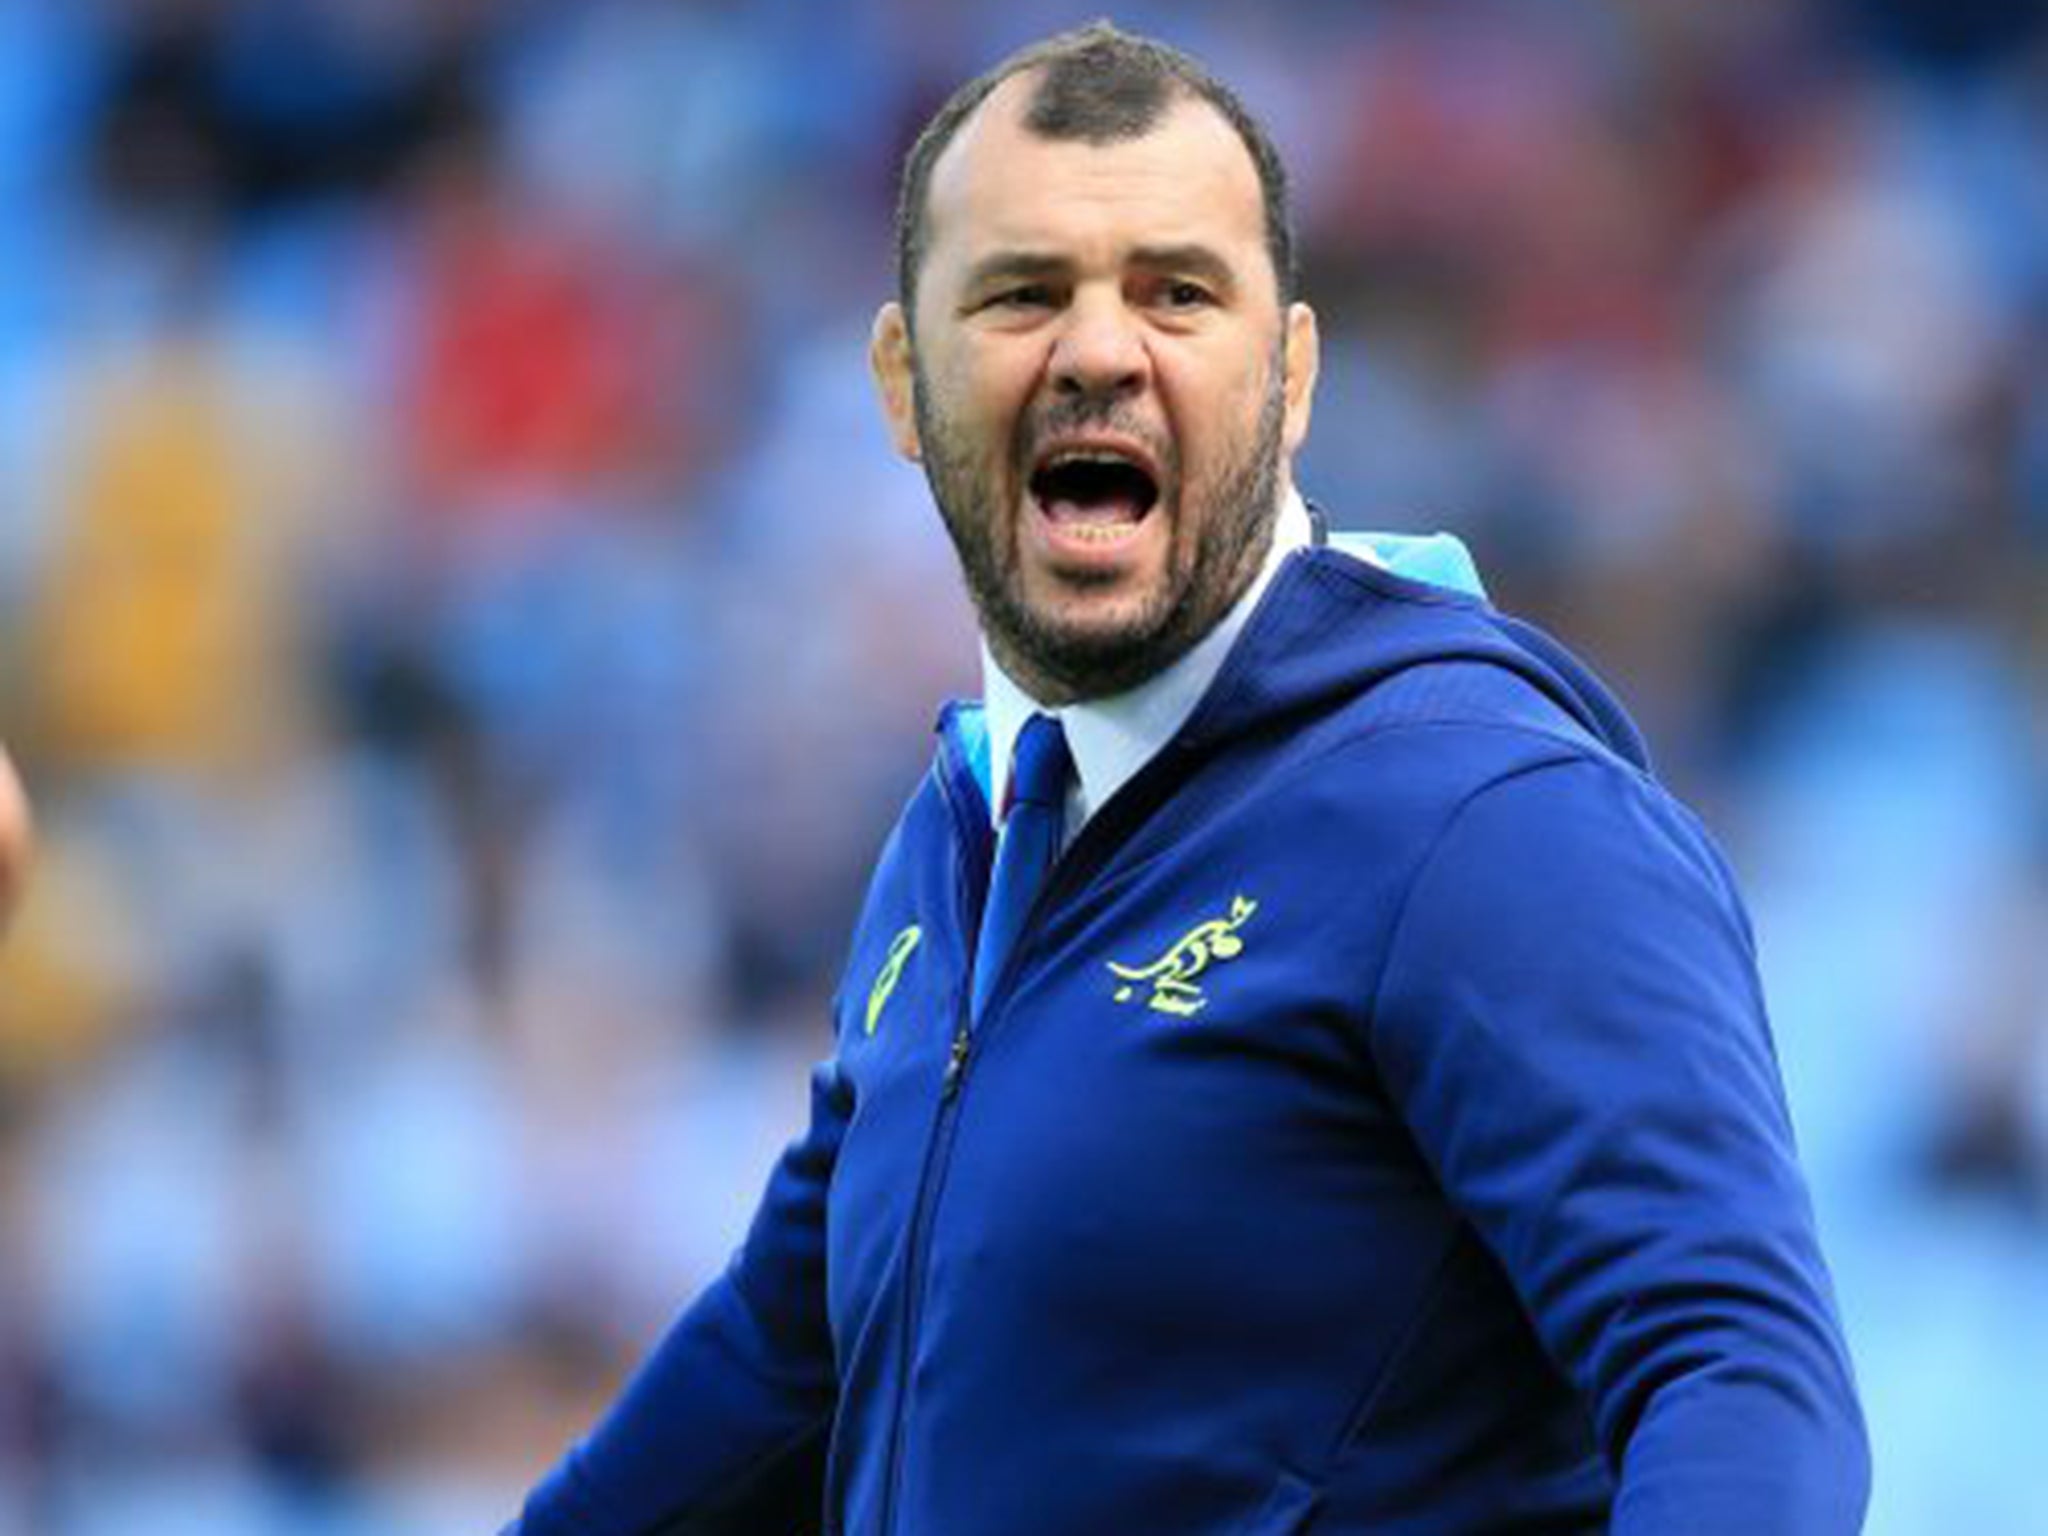 Michael Cheika sang the praises of his eclectic squad